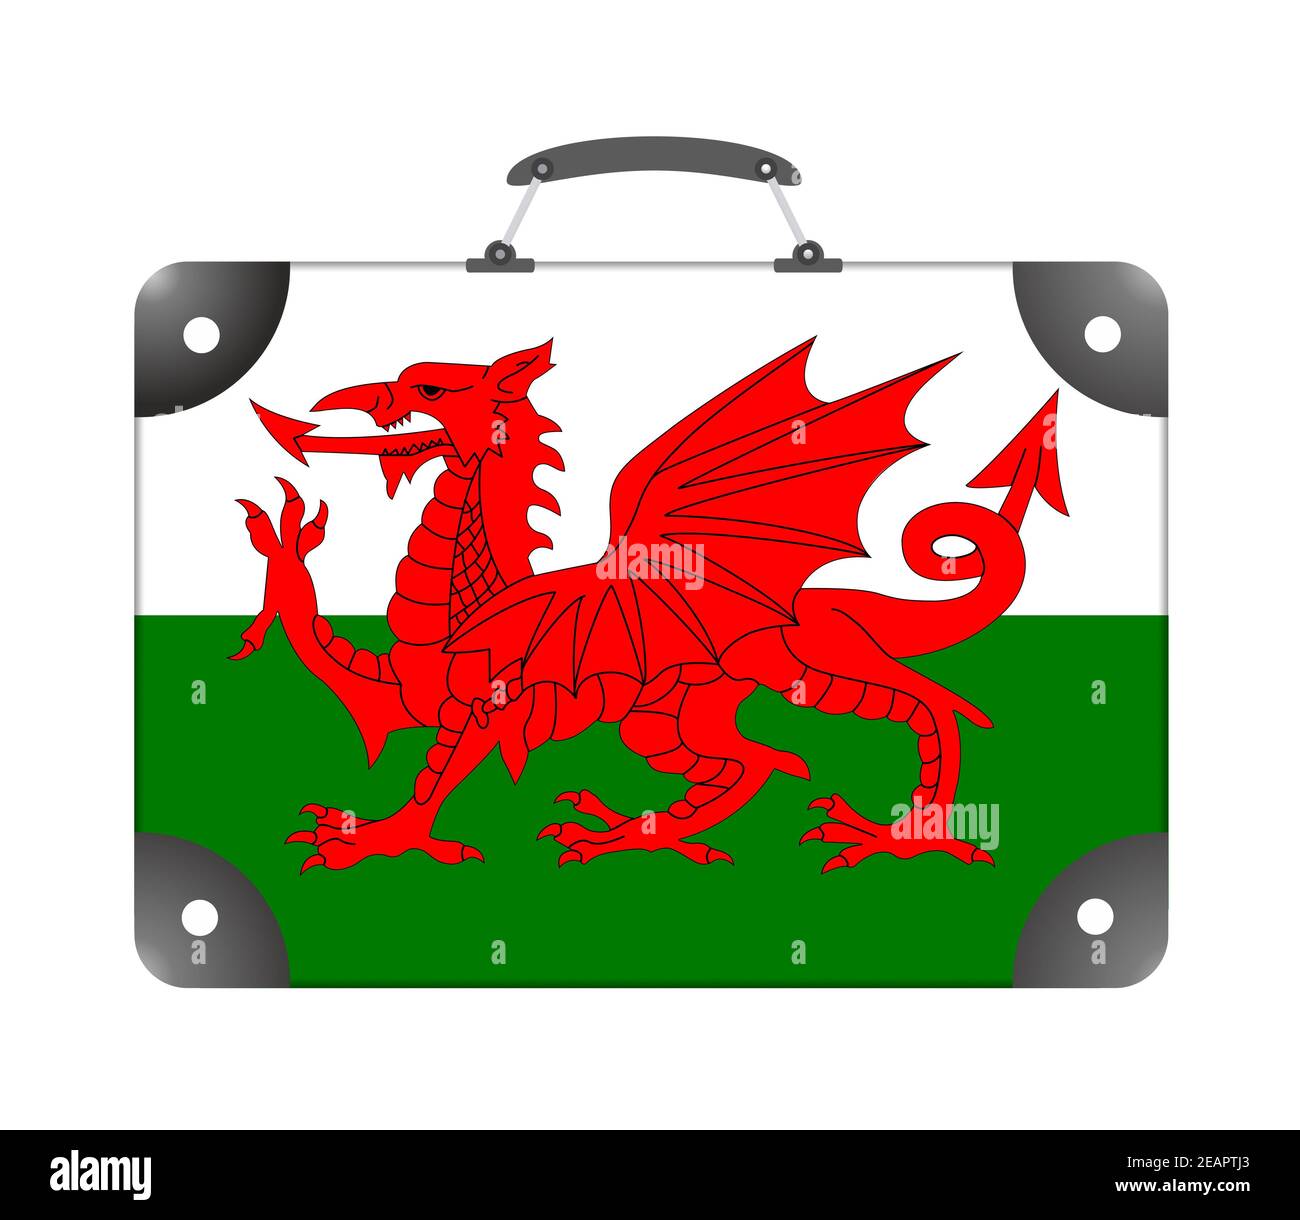 Wales country flag in the form of a travel suitcase on a white background Stock Photo